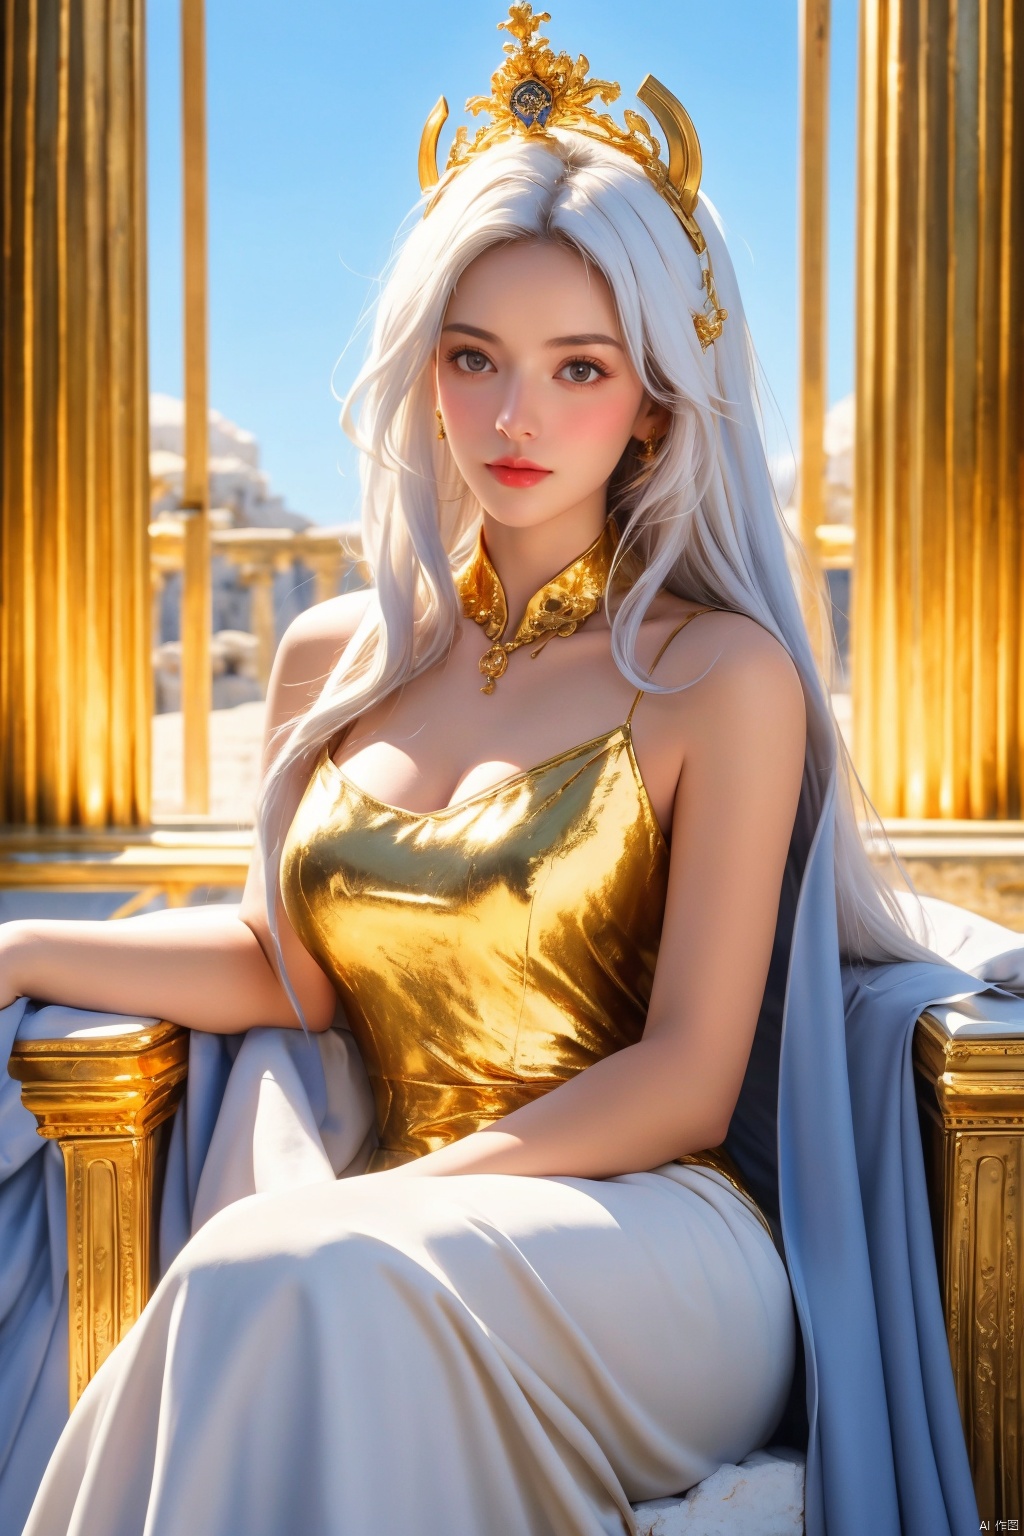 masterpiece, 1 girl, Look at me, White hair, Greek dress, Palace, Sitting on the throne, resplendent, Lots of roses, gilded, MYTHOS, Gold powder, Golden glow, textured skin, super detail, best quality, 16k, Blue sky outside the window, Ancient Greece